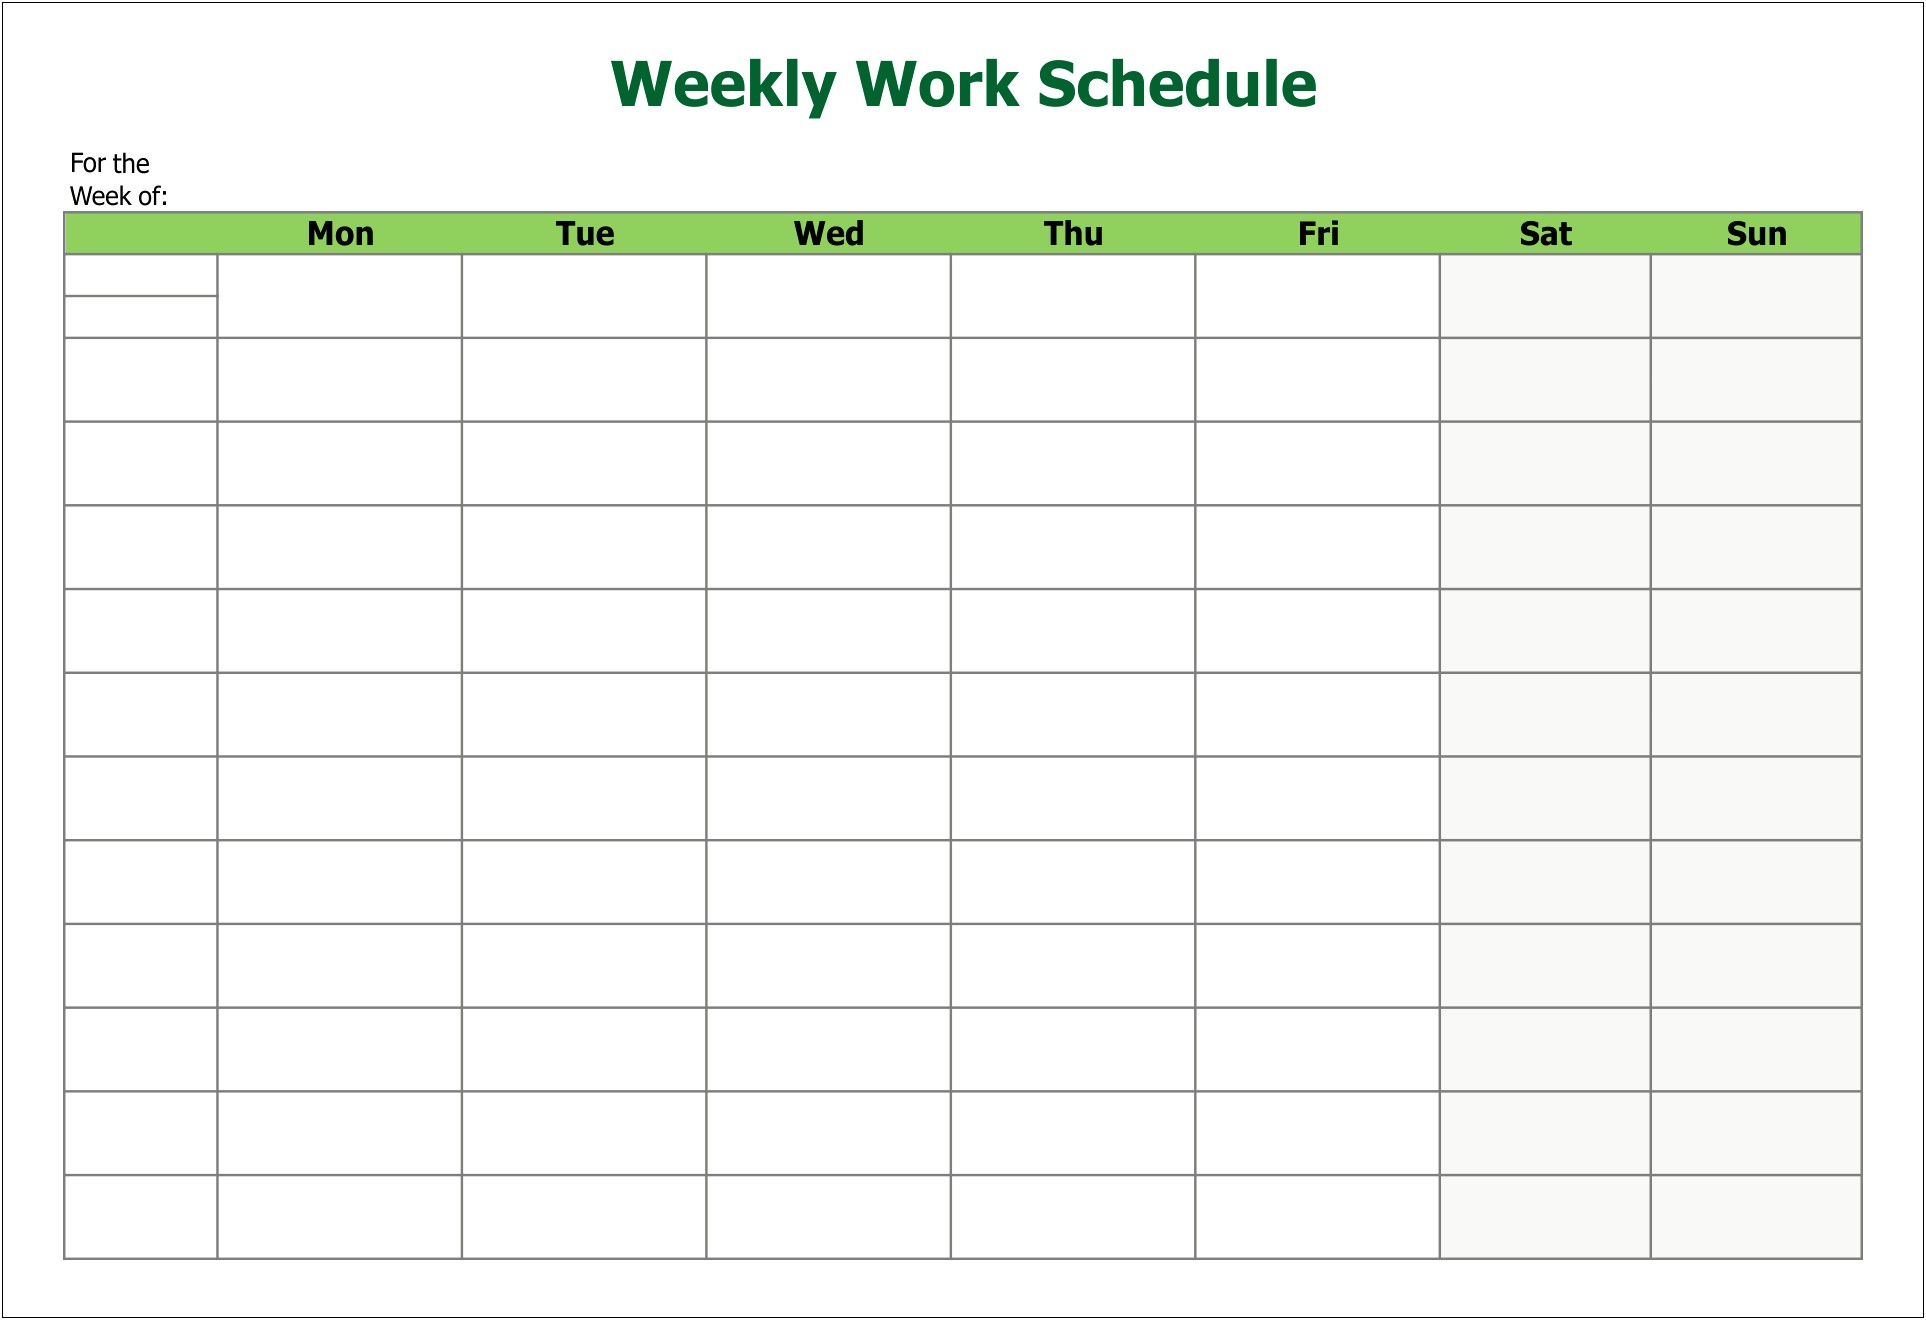 Weekly Employee Shift Schedule Template Excel Free